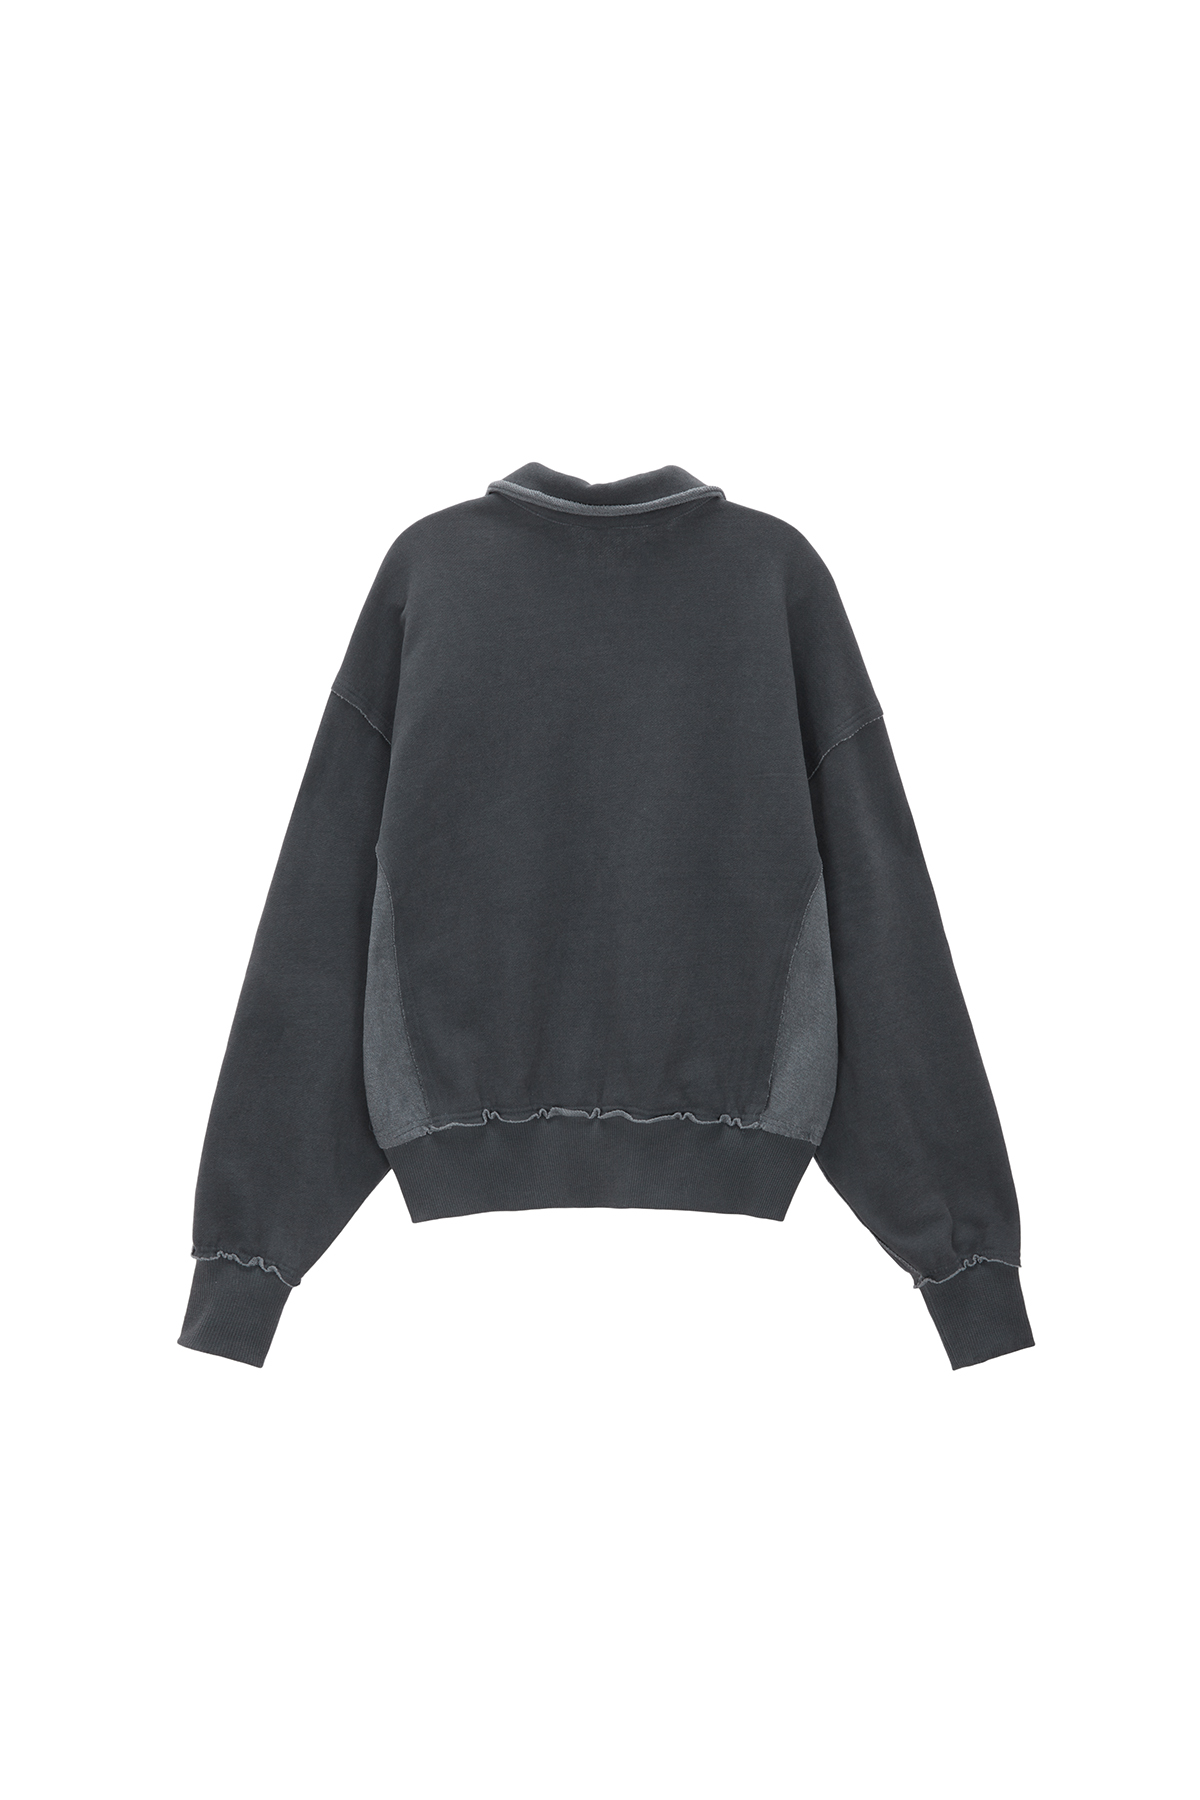 CUT OUT PIGMENT PIQUE SWEATSHIRT FOR WOMEN IN GREY